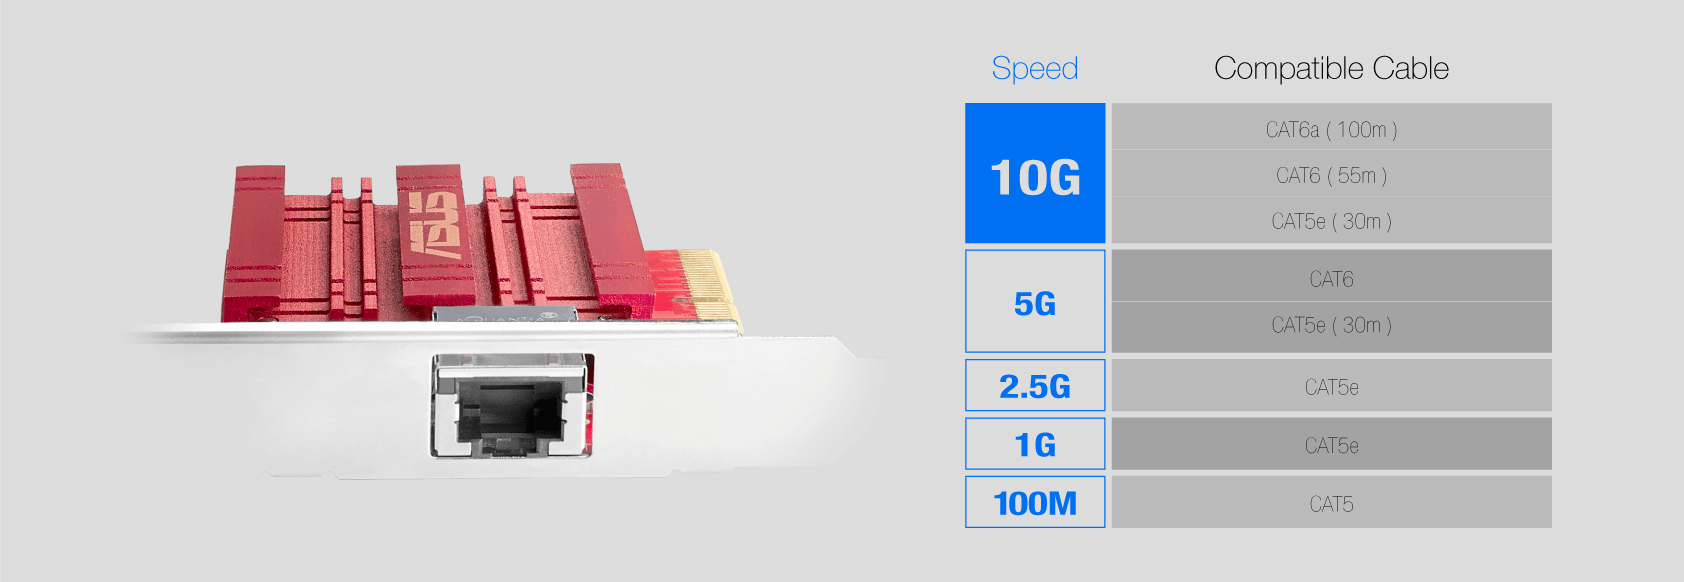 The RJ45 port on XG-C100C gives you easy migration to futuristic 10G speed on acessible copper network cable.